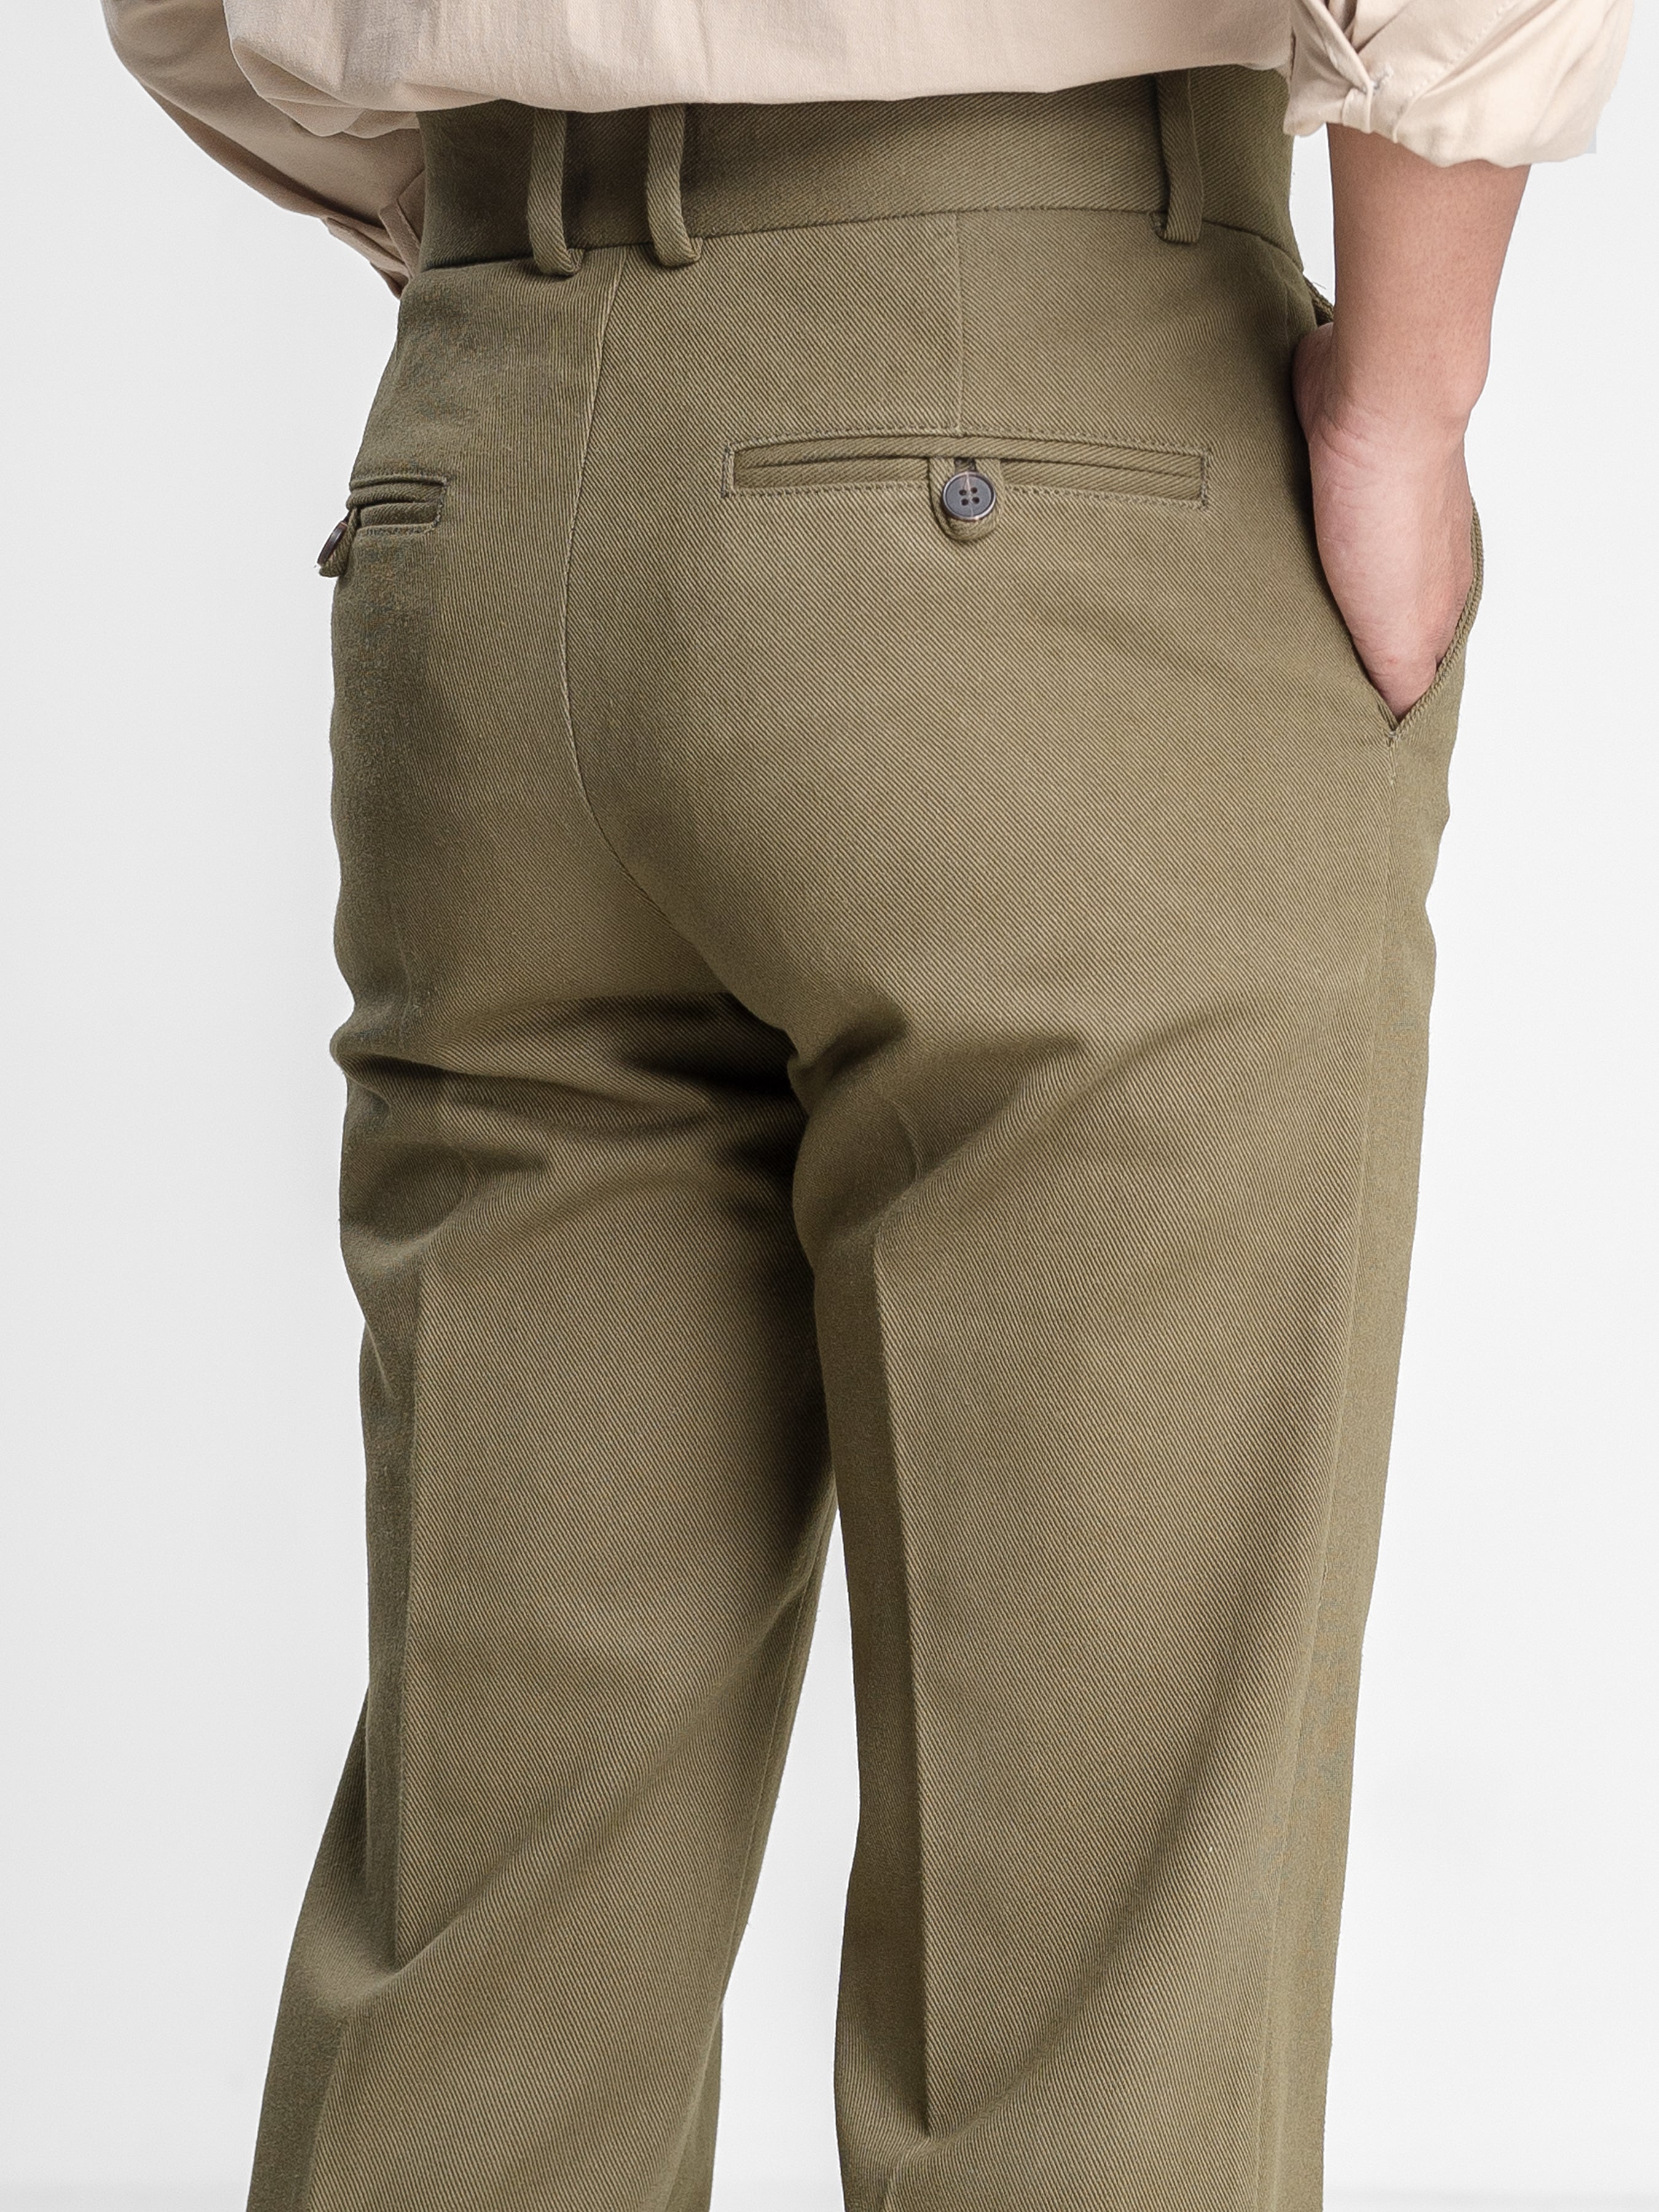 Jose Straight Cut Trousers - Olive Green